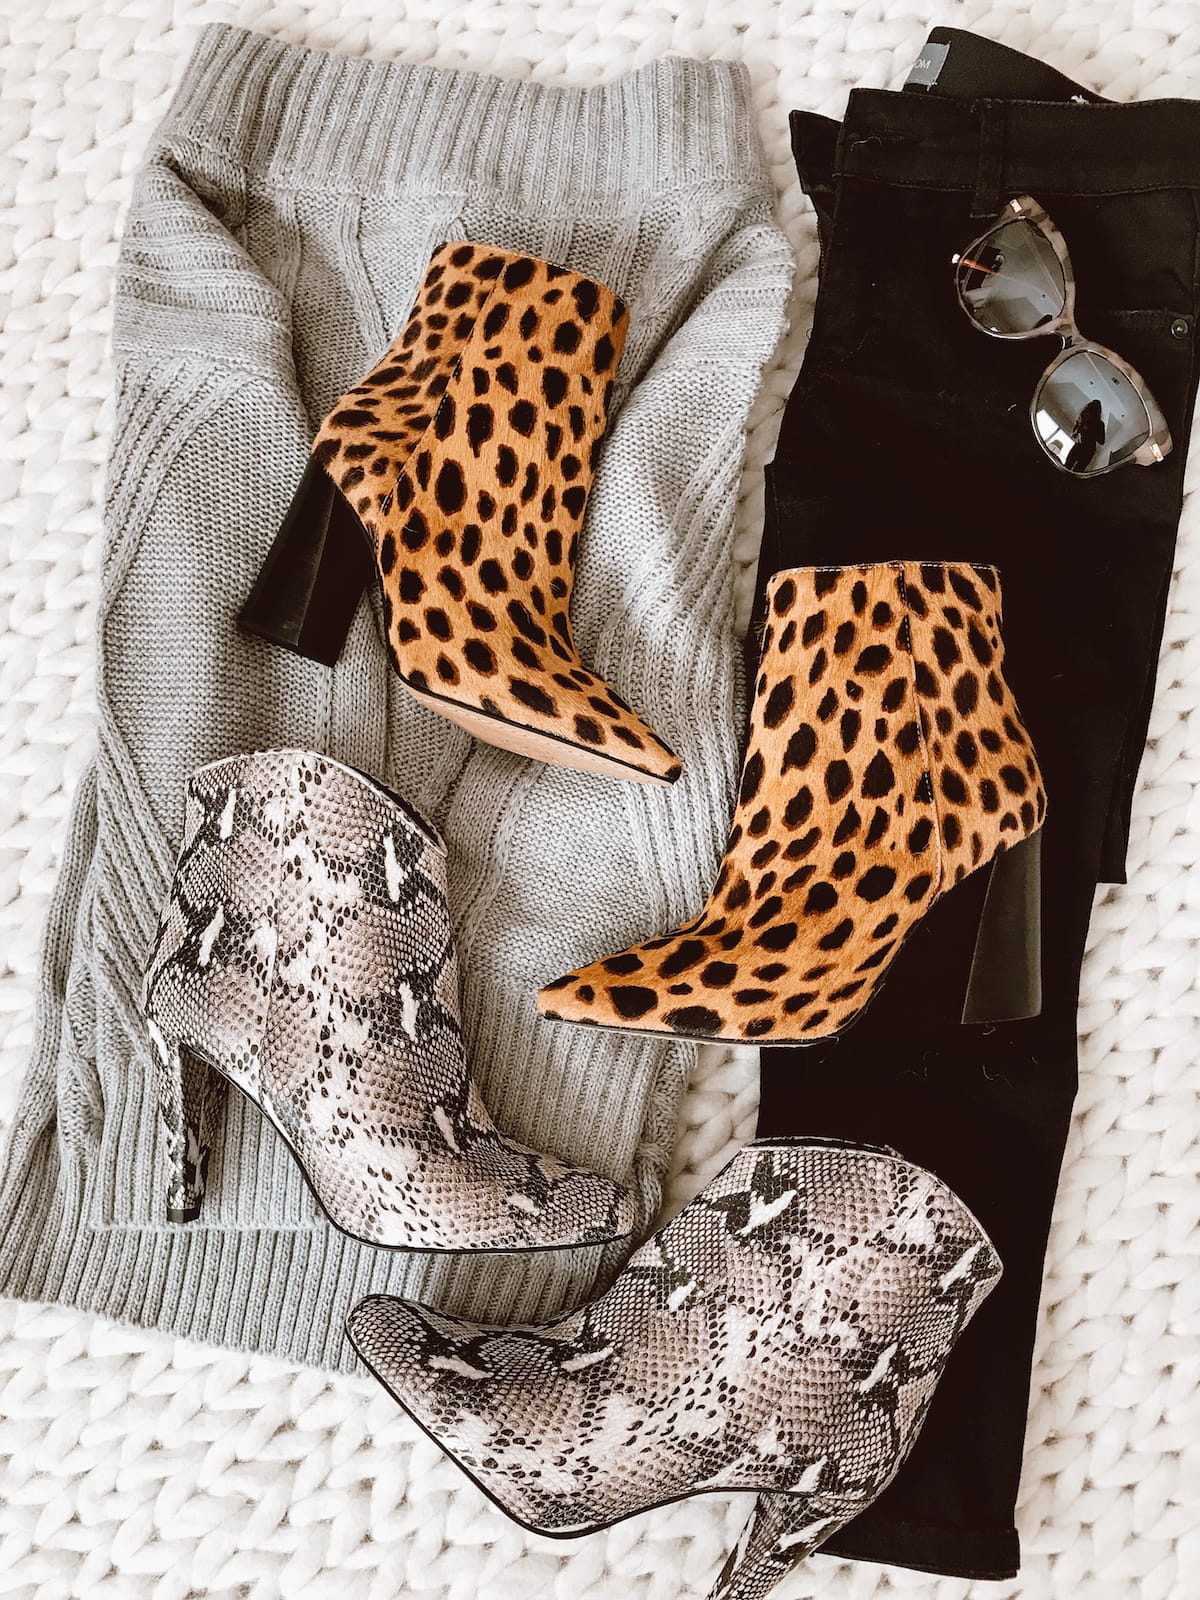 Winter outfit - snakeskin and leopard booties